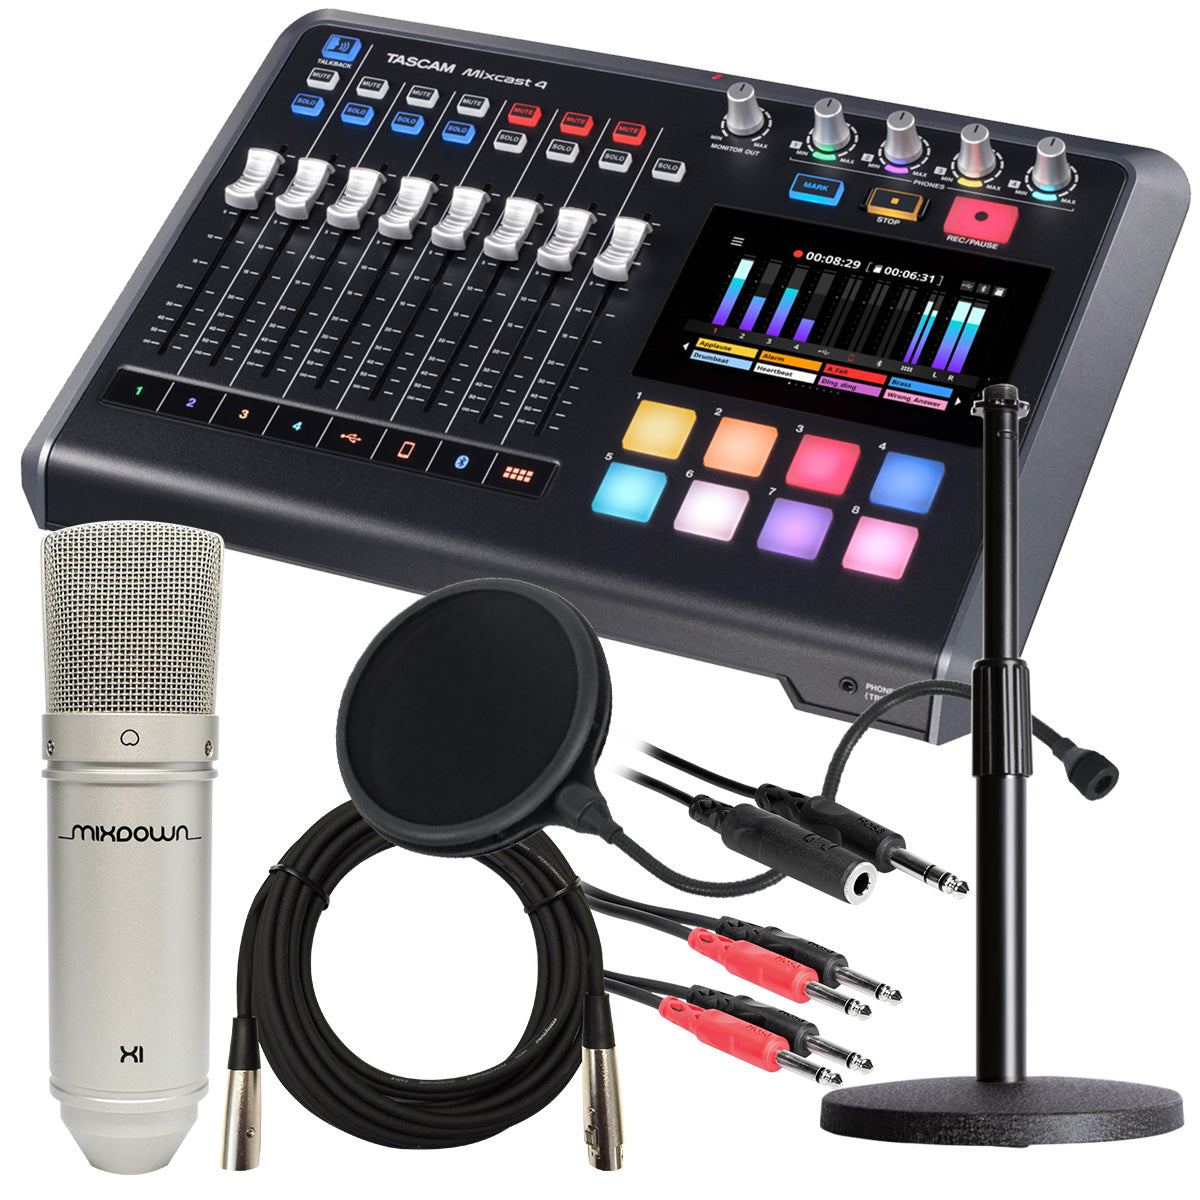 Collage of the components in the Tascam Mixcast 4 Podcast Station STUDIO KIT bundle